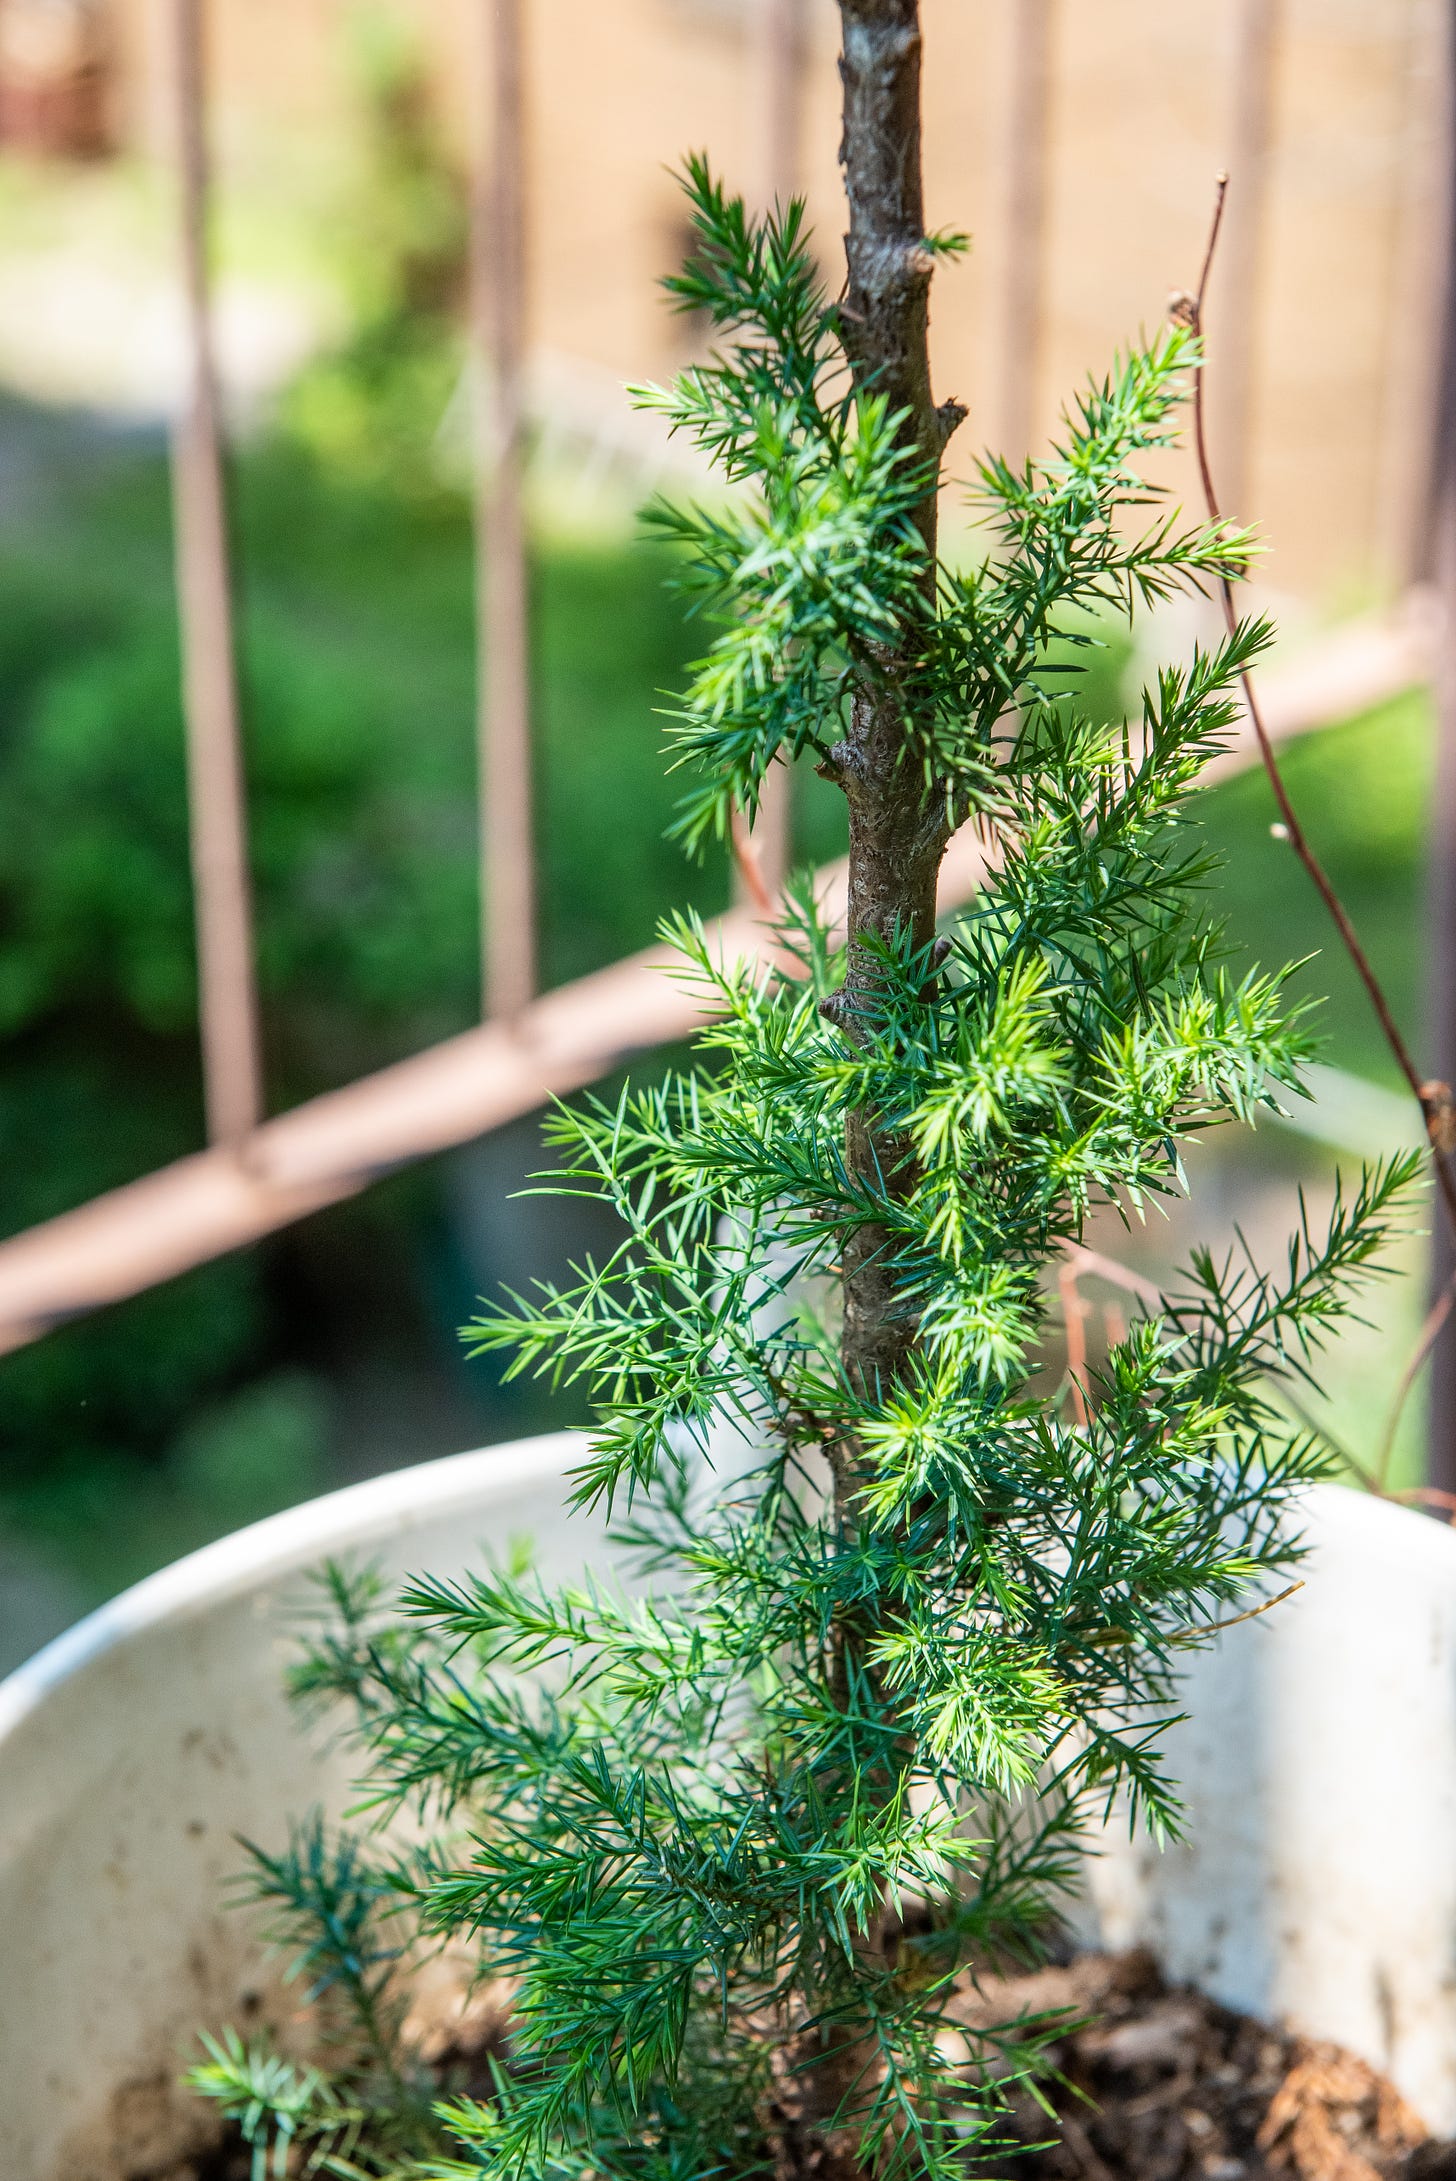 Image description: photo of eastern red cedar tree on my fire escape with new growth. End image description.